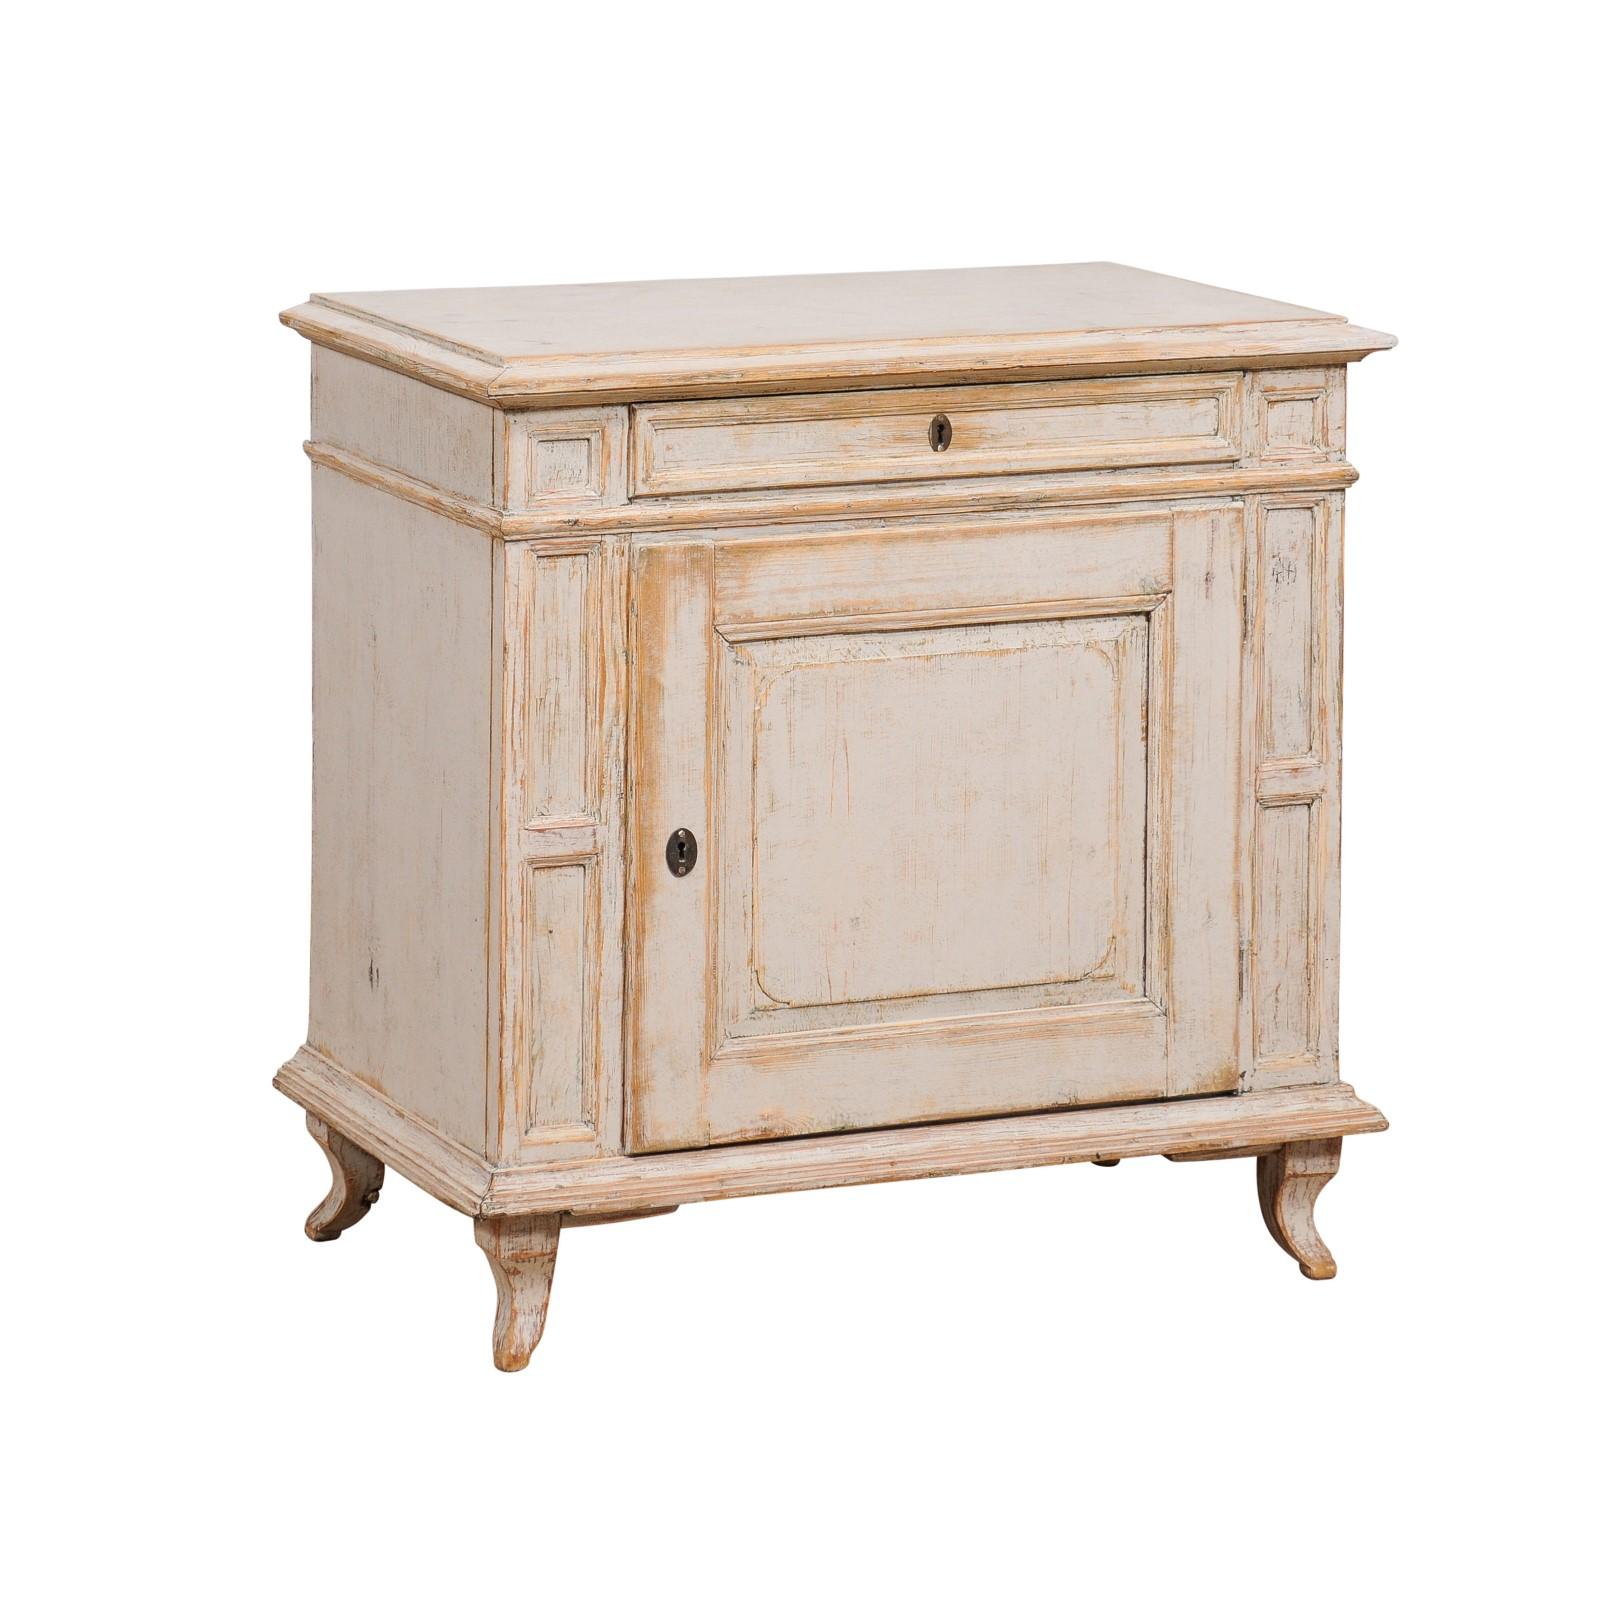 A Swedish neutral light/medium grey painted wood cabinet from circa 1880 with single drawer over single door, wood showing through, recessed panels with molded accents and petite curving feet. Grace your home with the timeless sophistication of this